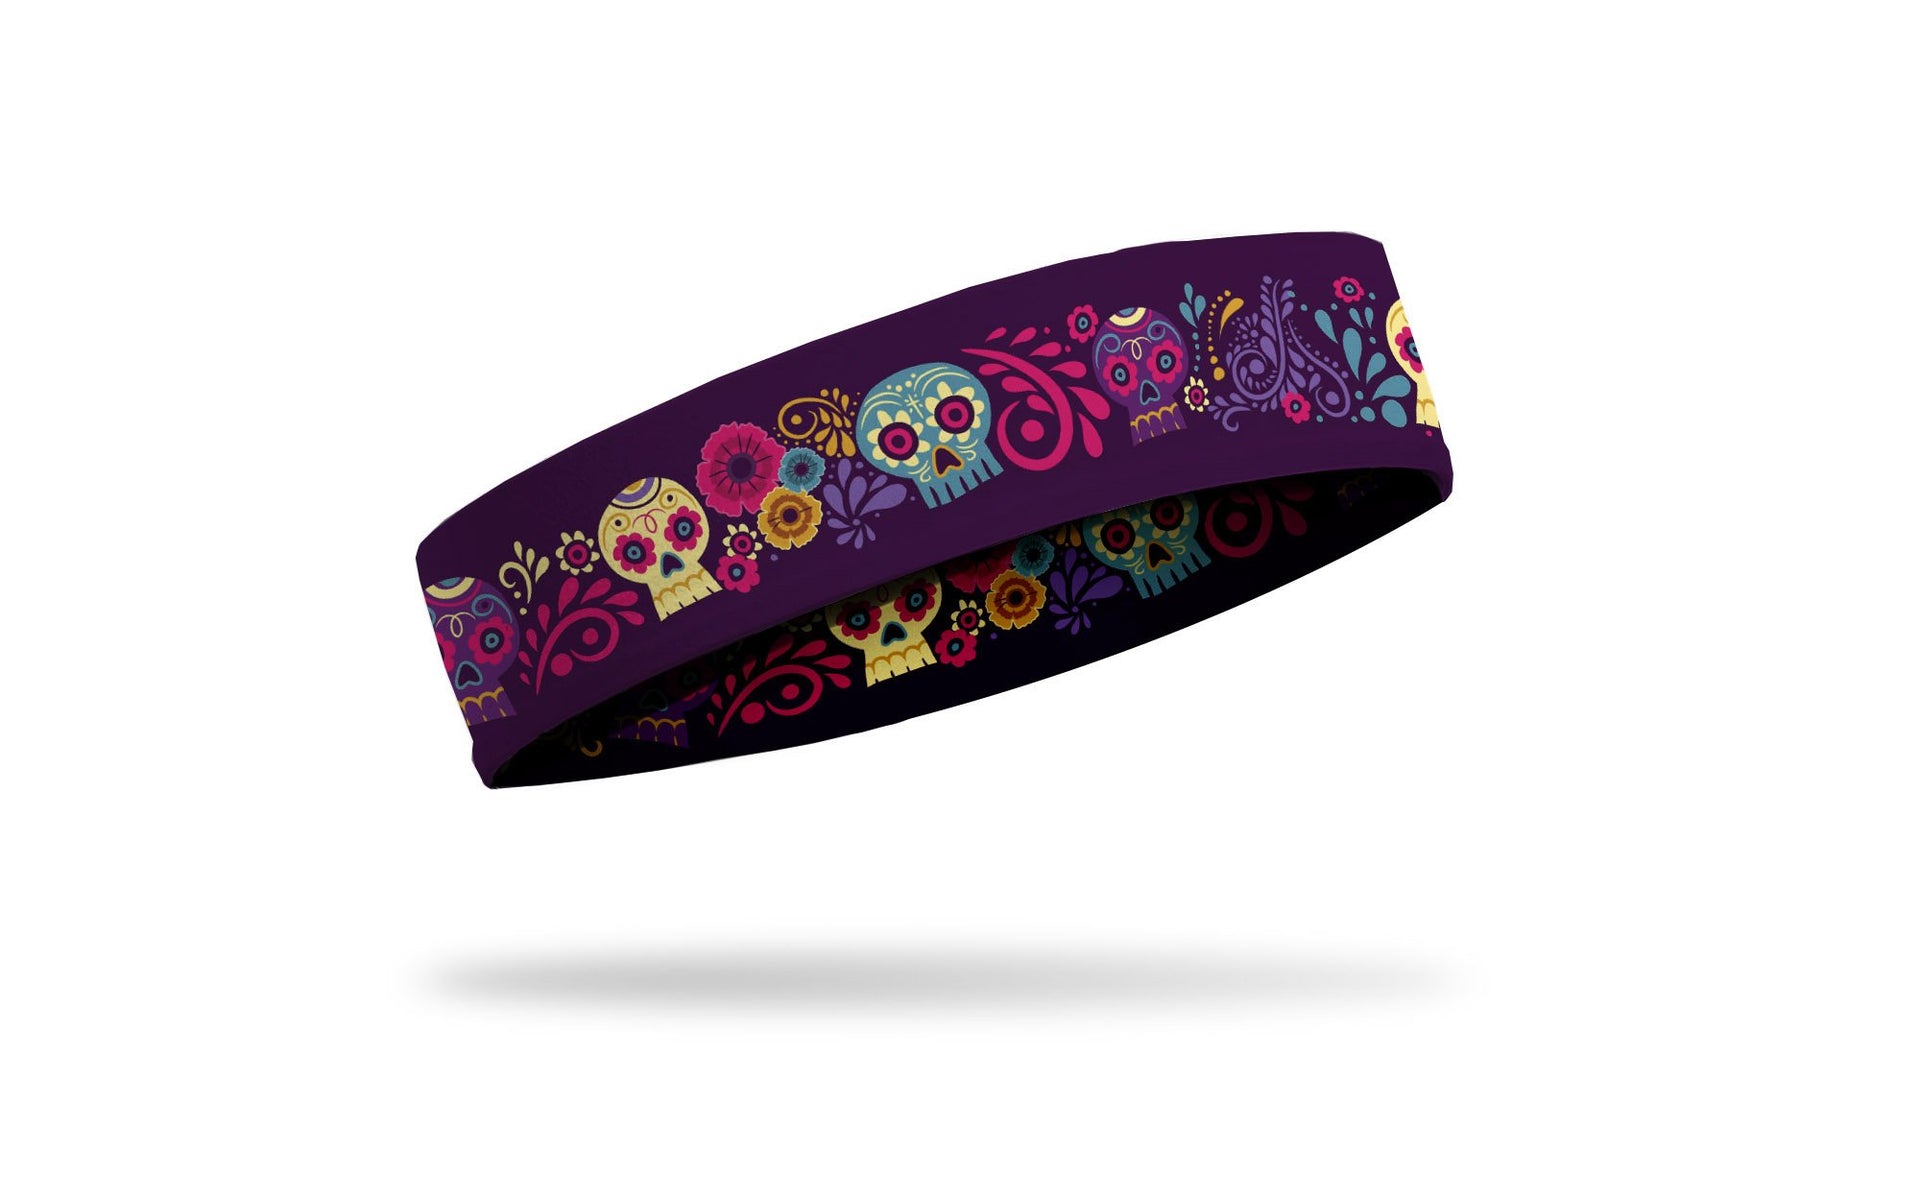 dark purple headband with turquoise cream gold and bright pink floral accents and sugar skulls